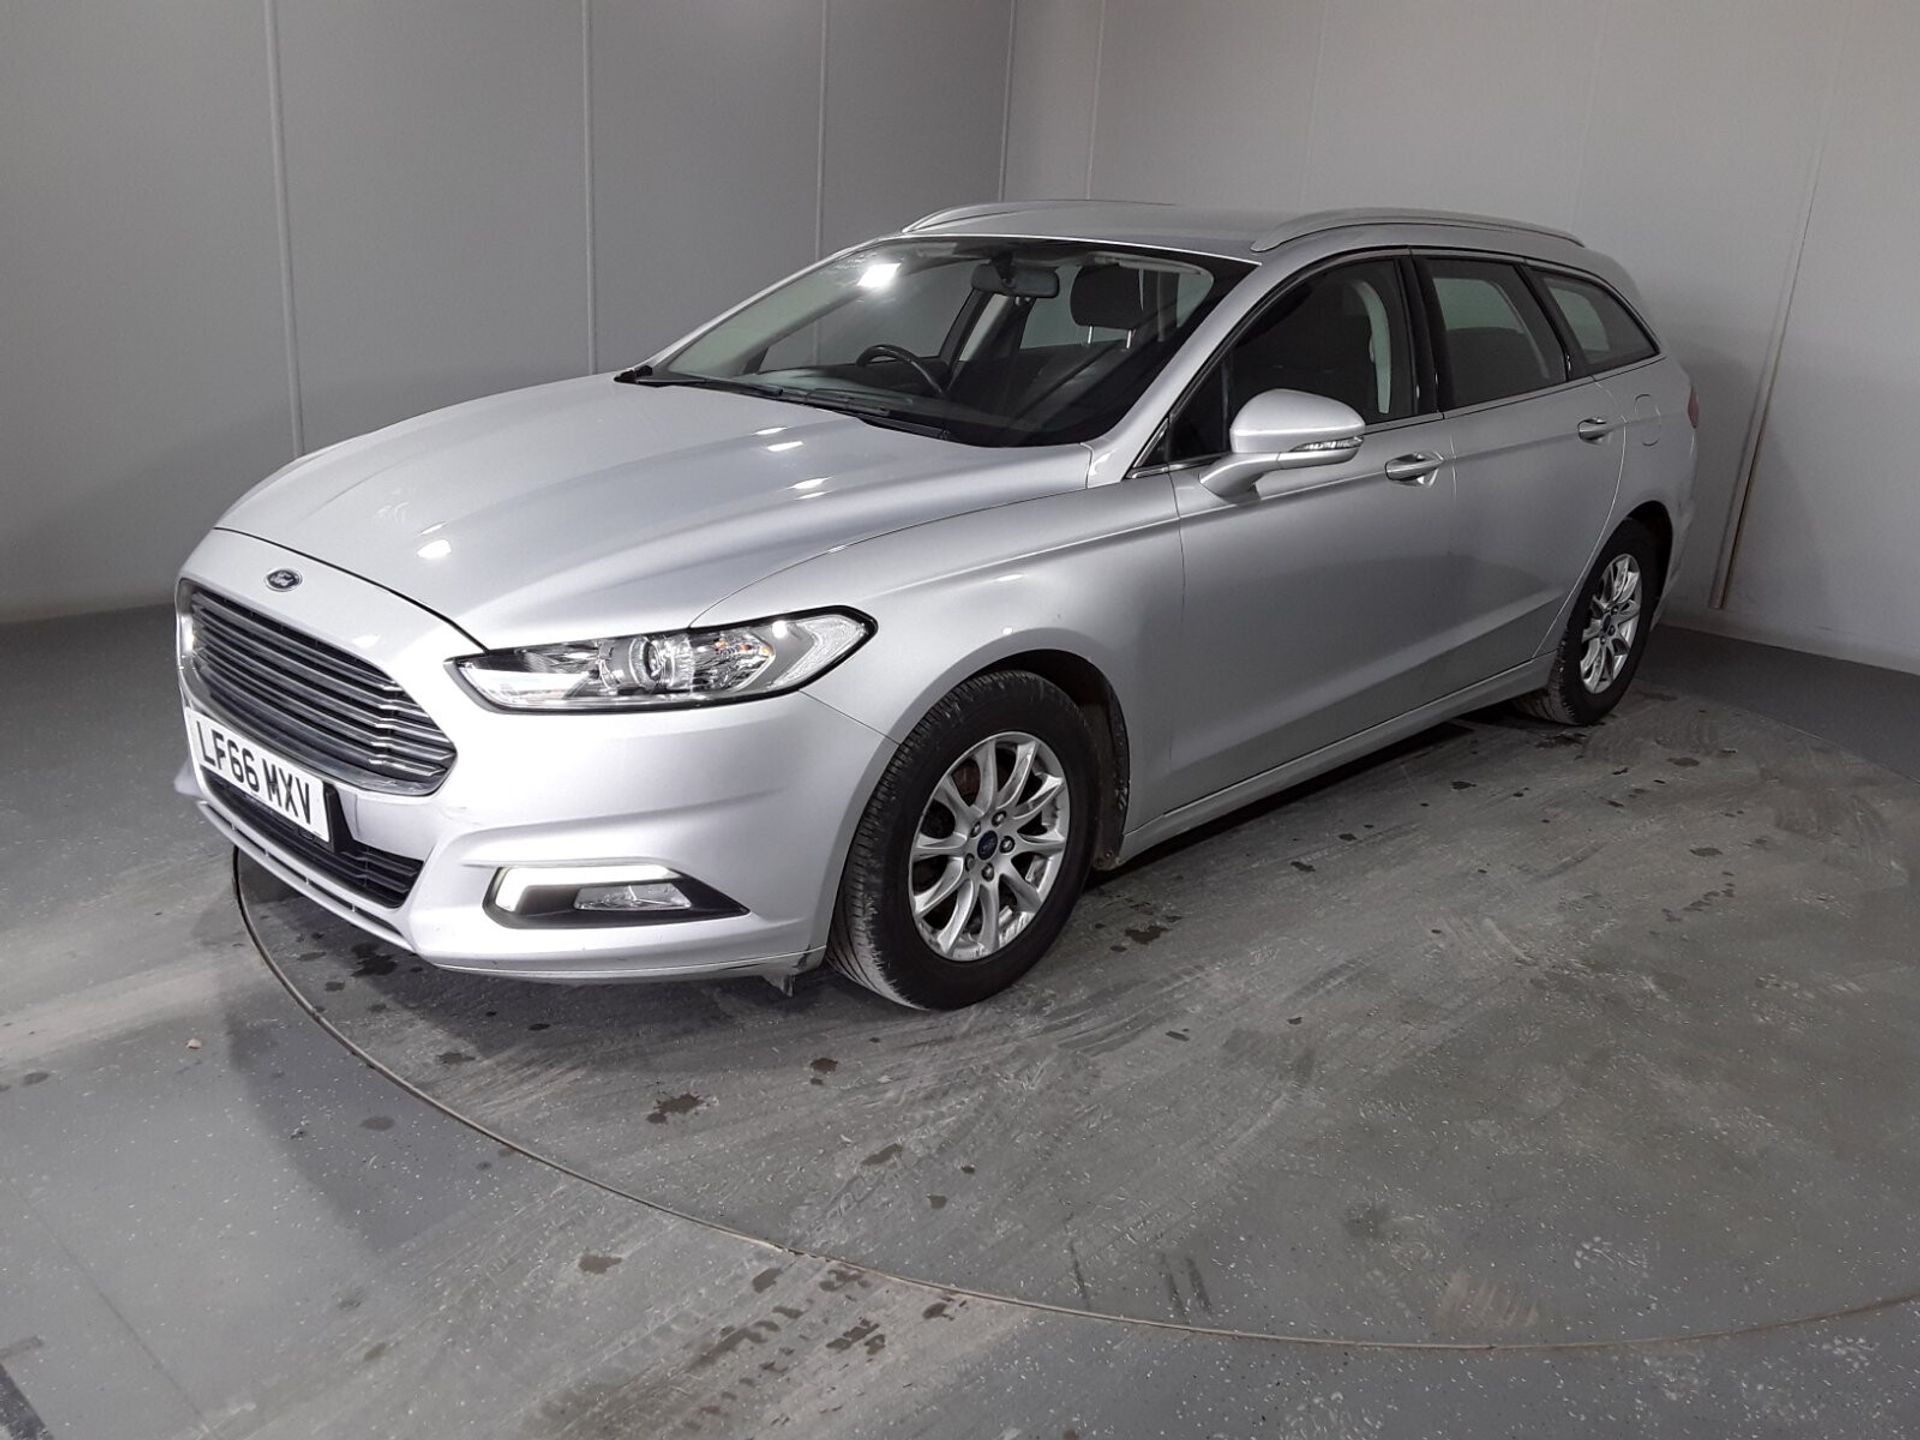 Used Ford Mondeo 2.0 TDCi Zetec 5dr For Sale Reg